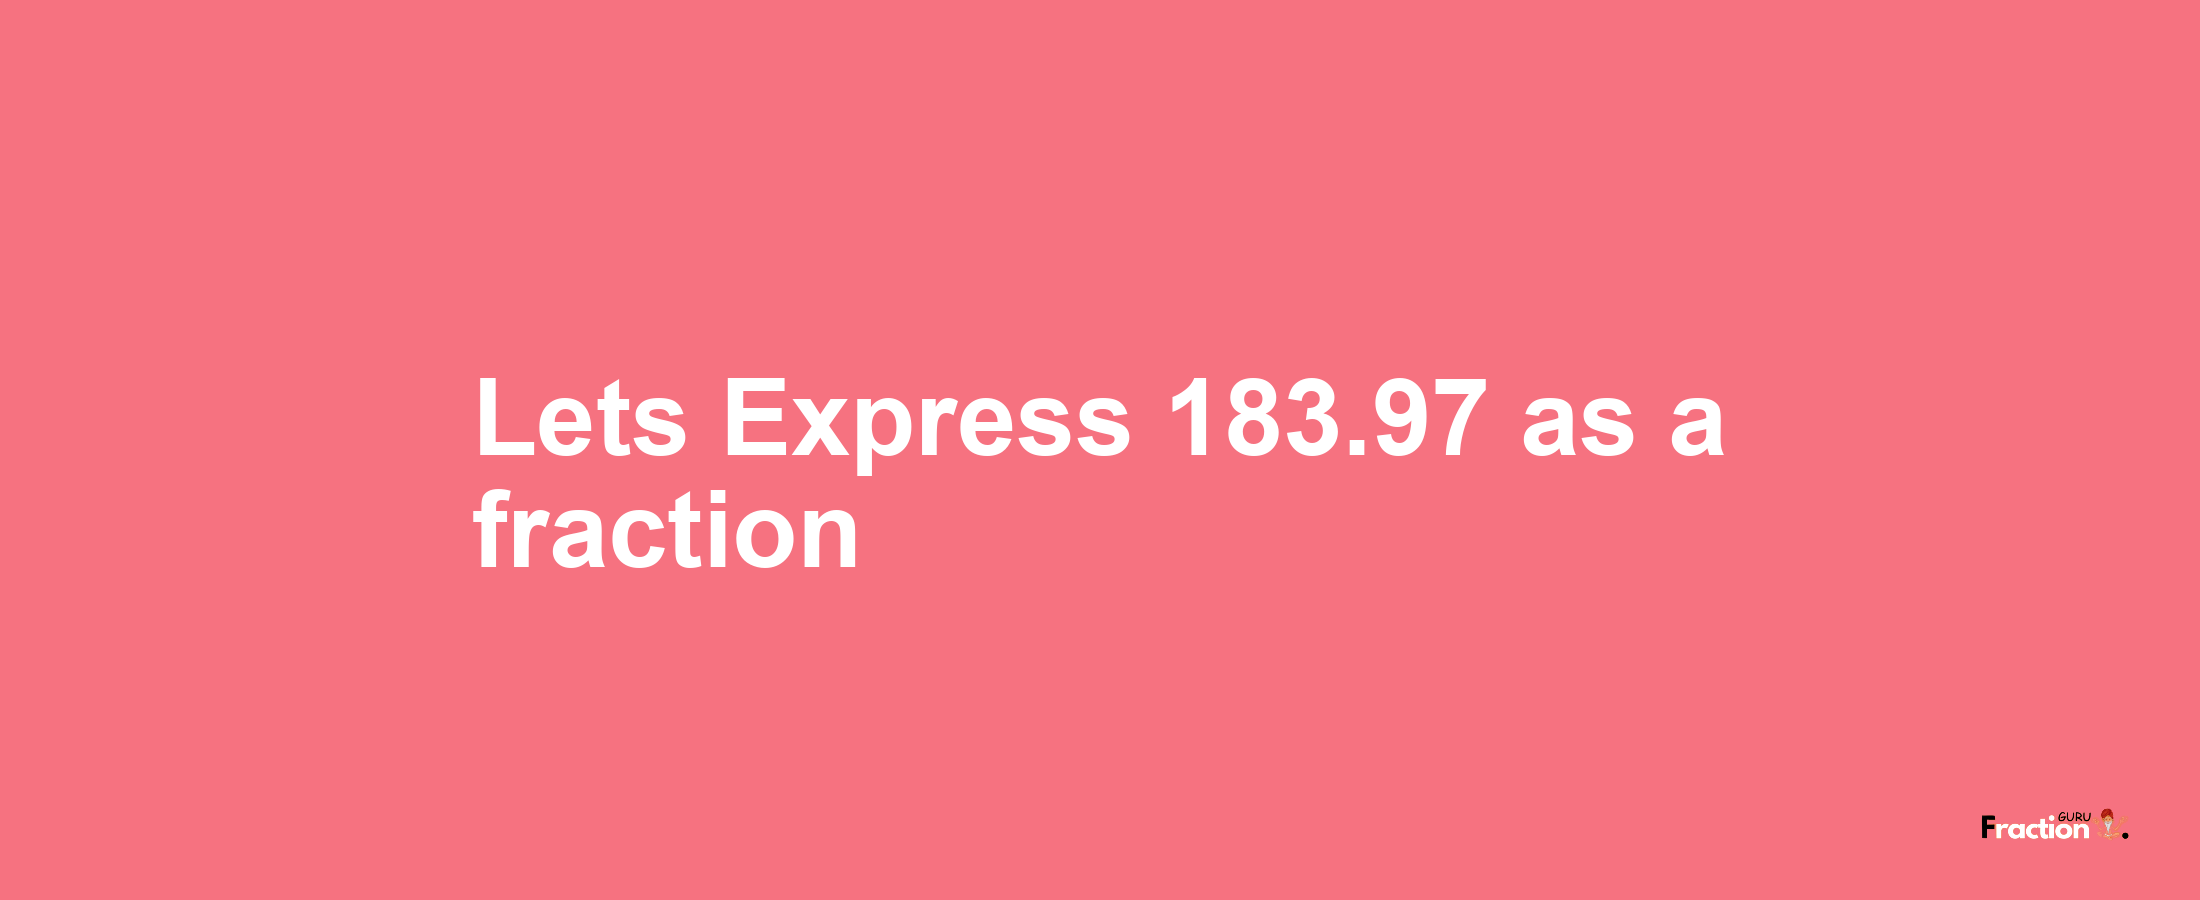 Lets Express 183.97 as afraction